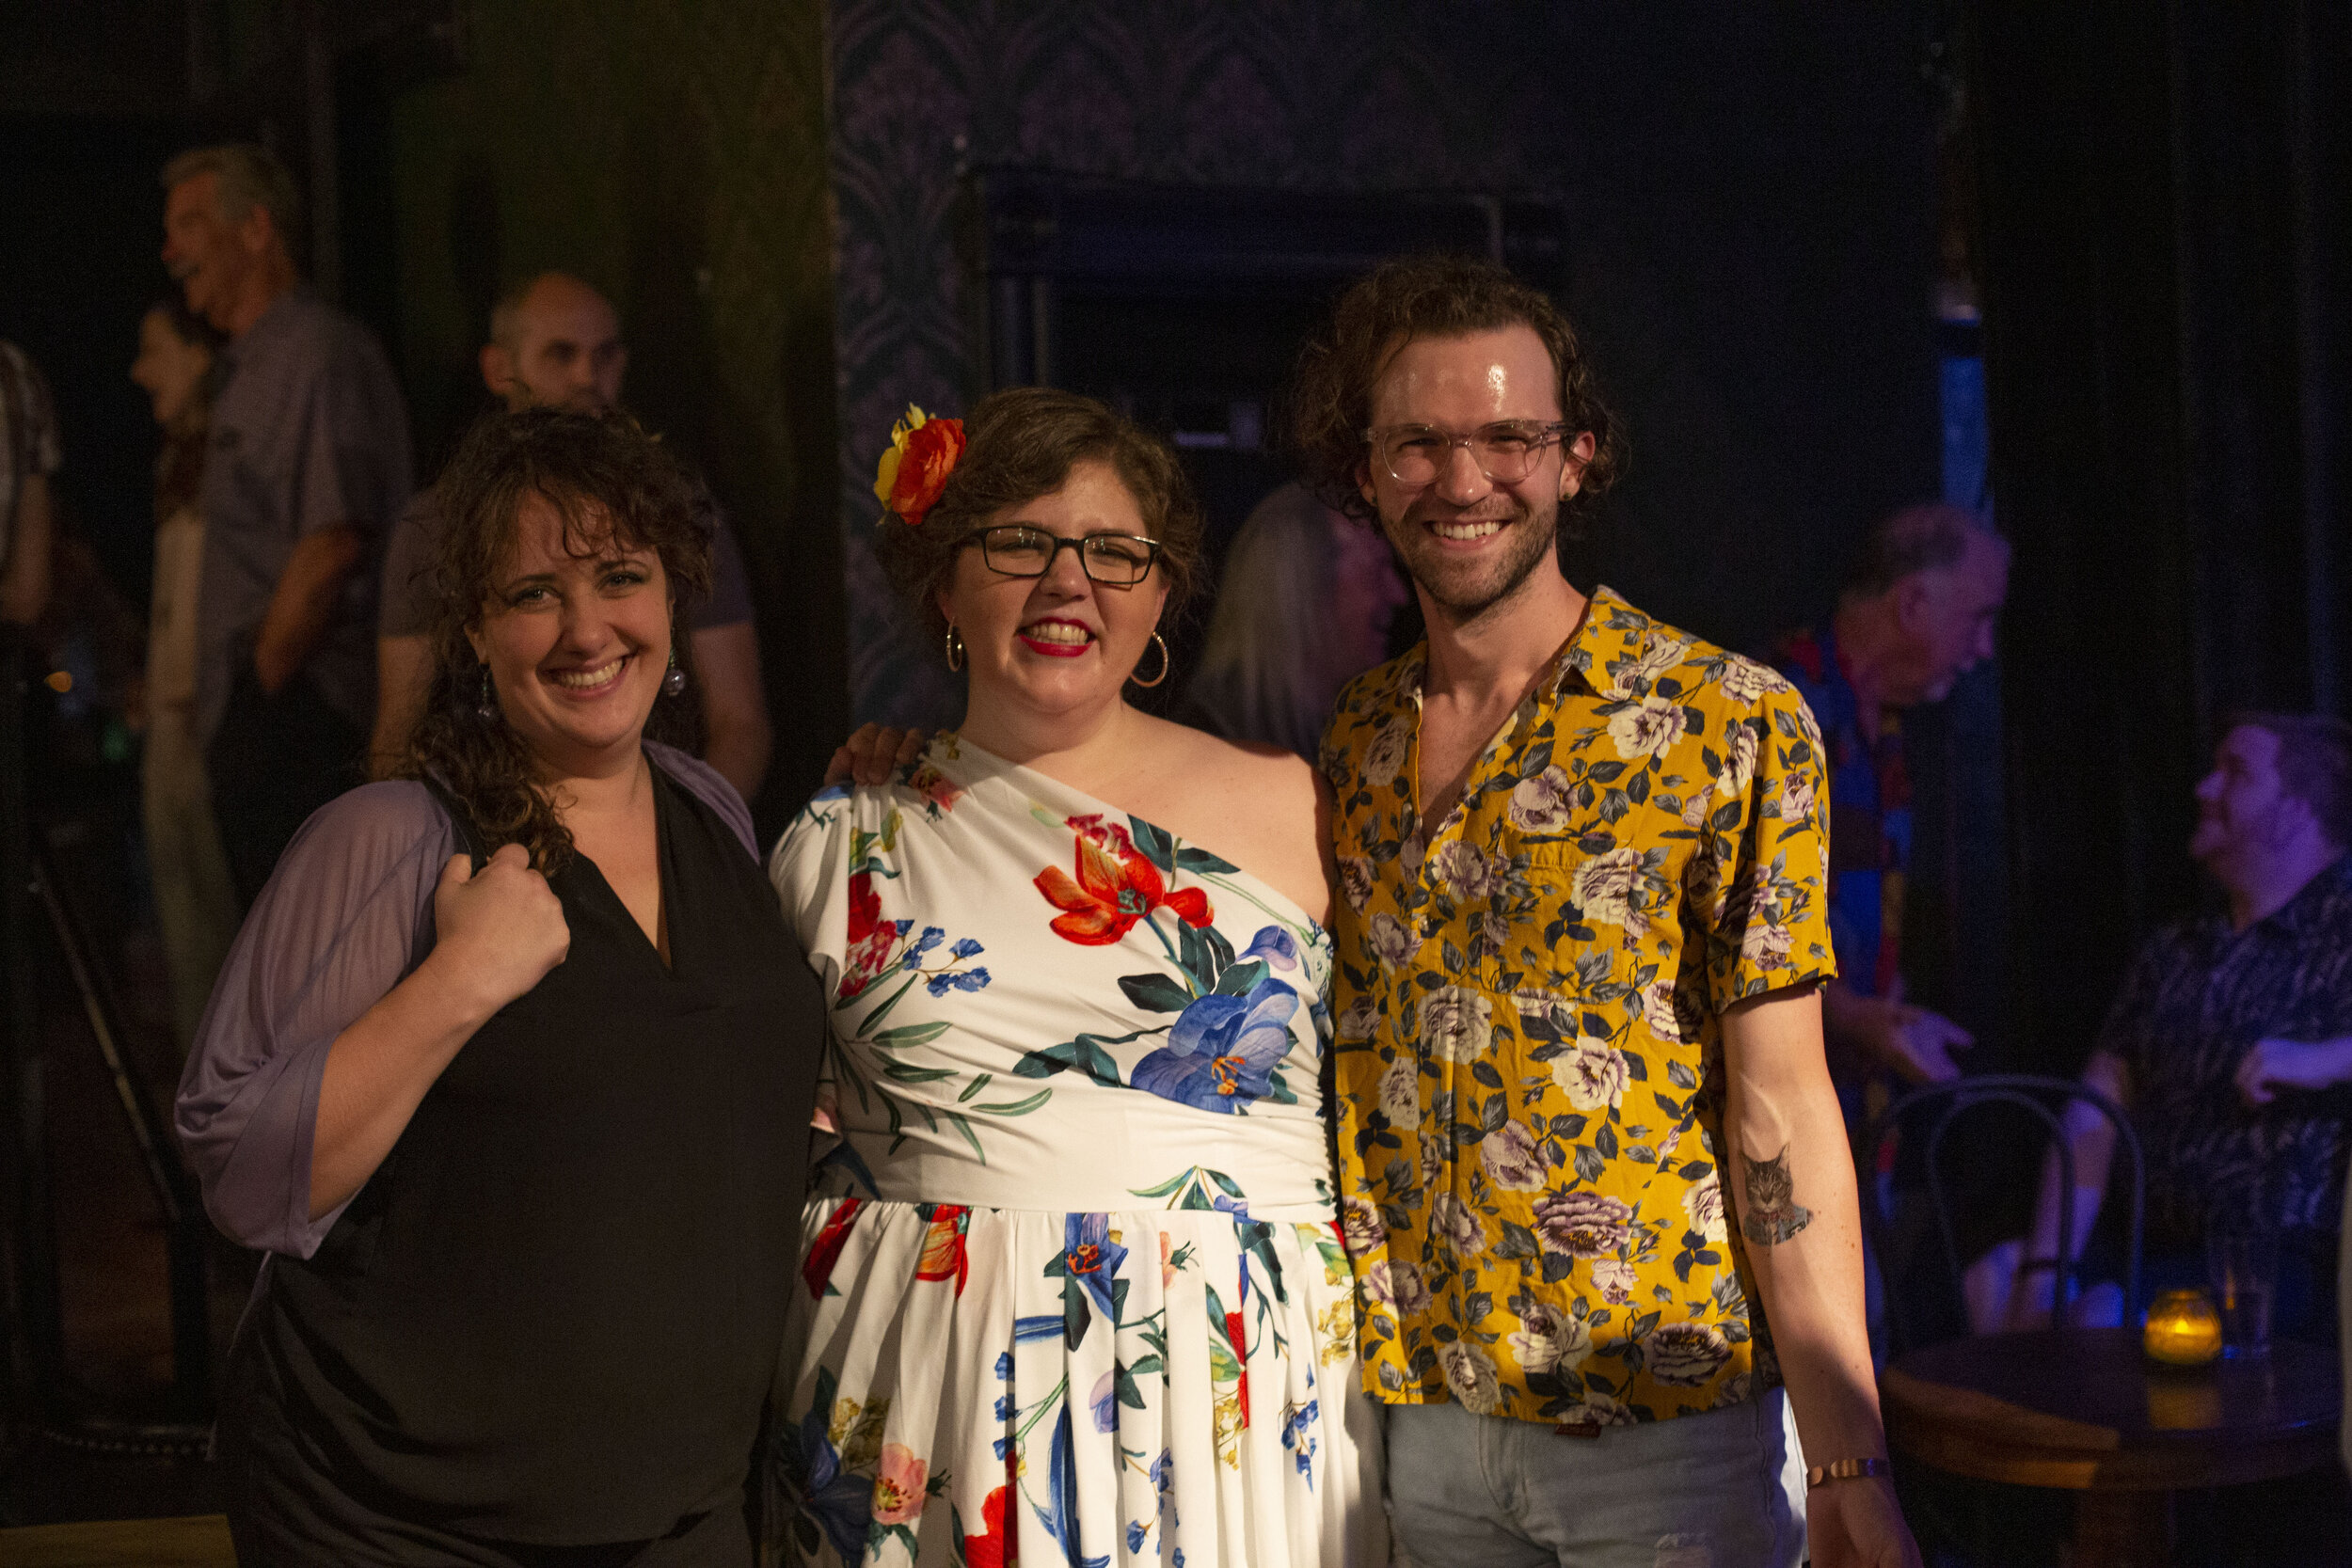  With two of my beloved  Hedwig  family, the incomparable  Sarah Gene Dowling  and  Luke Steingruby . PC: August Oldelm 